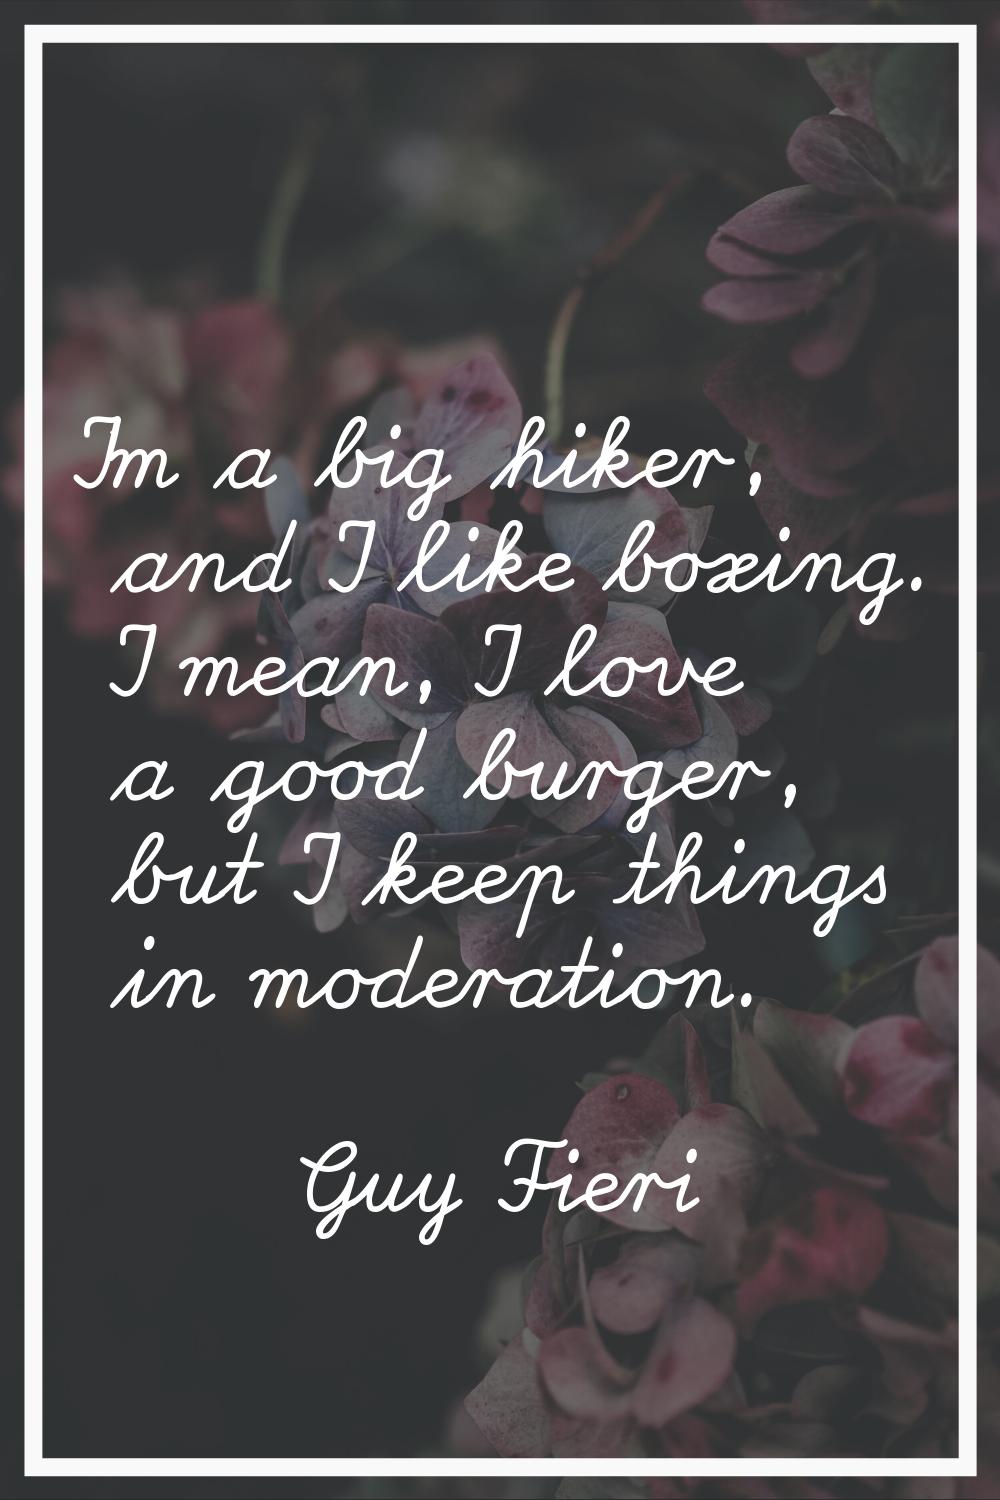 I'm a big hiker, and I like boxing. I mean, I love a good burger, but I keep things in moderation.